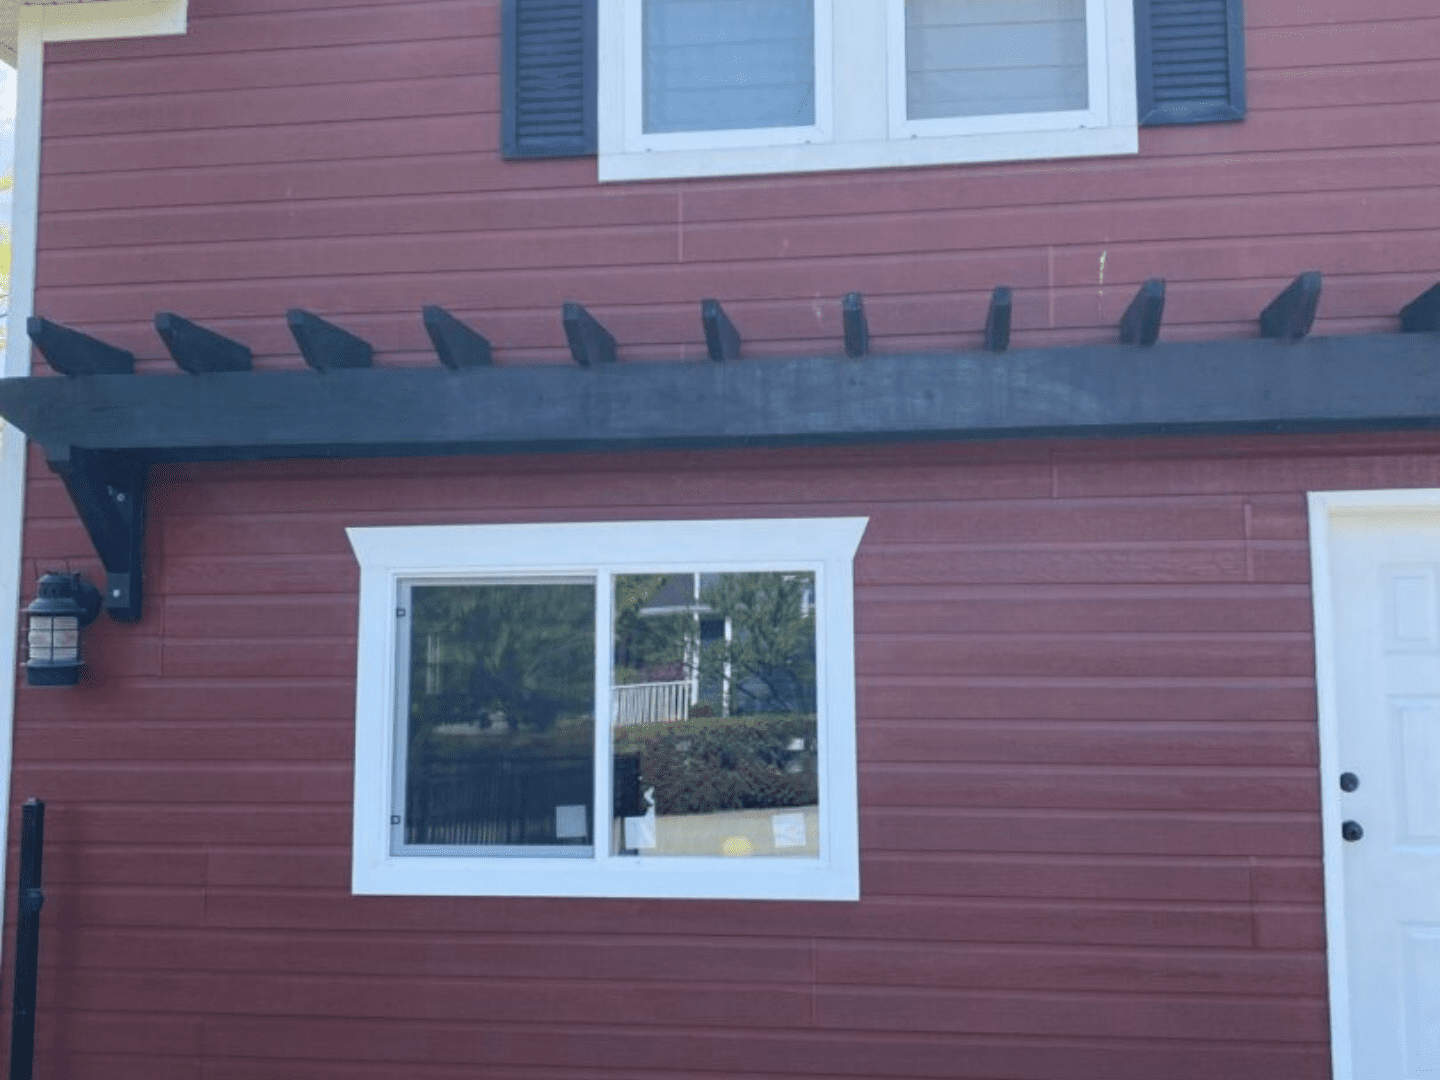 A red house with a window and some birds on the roof